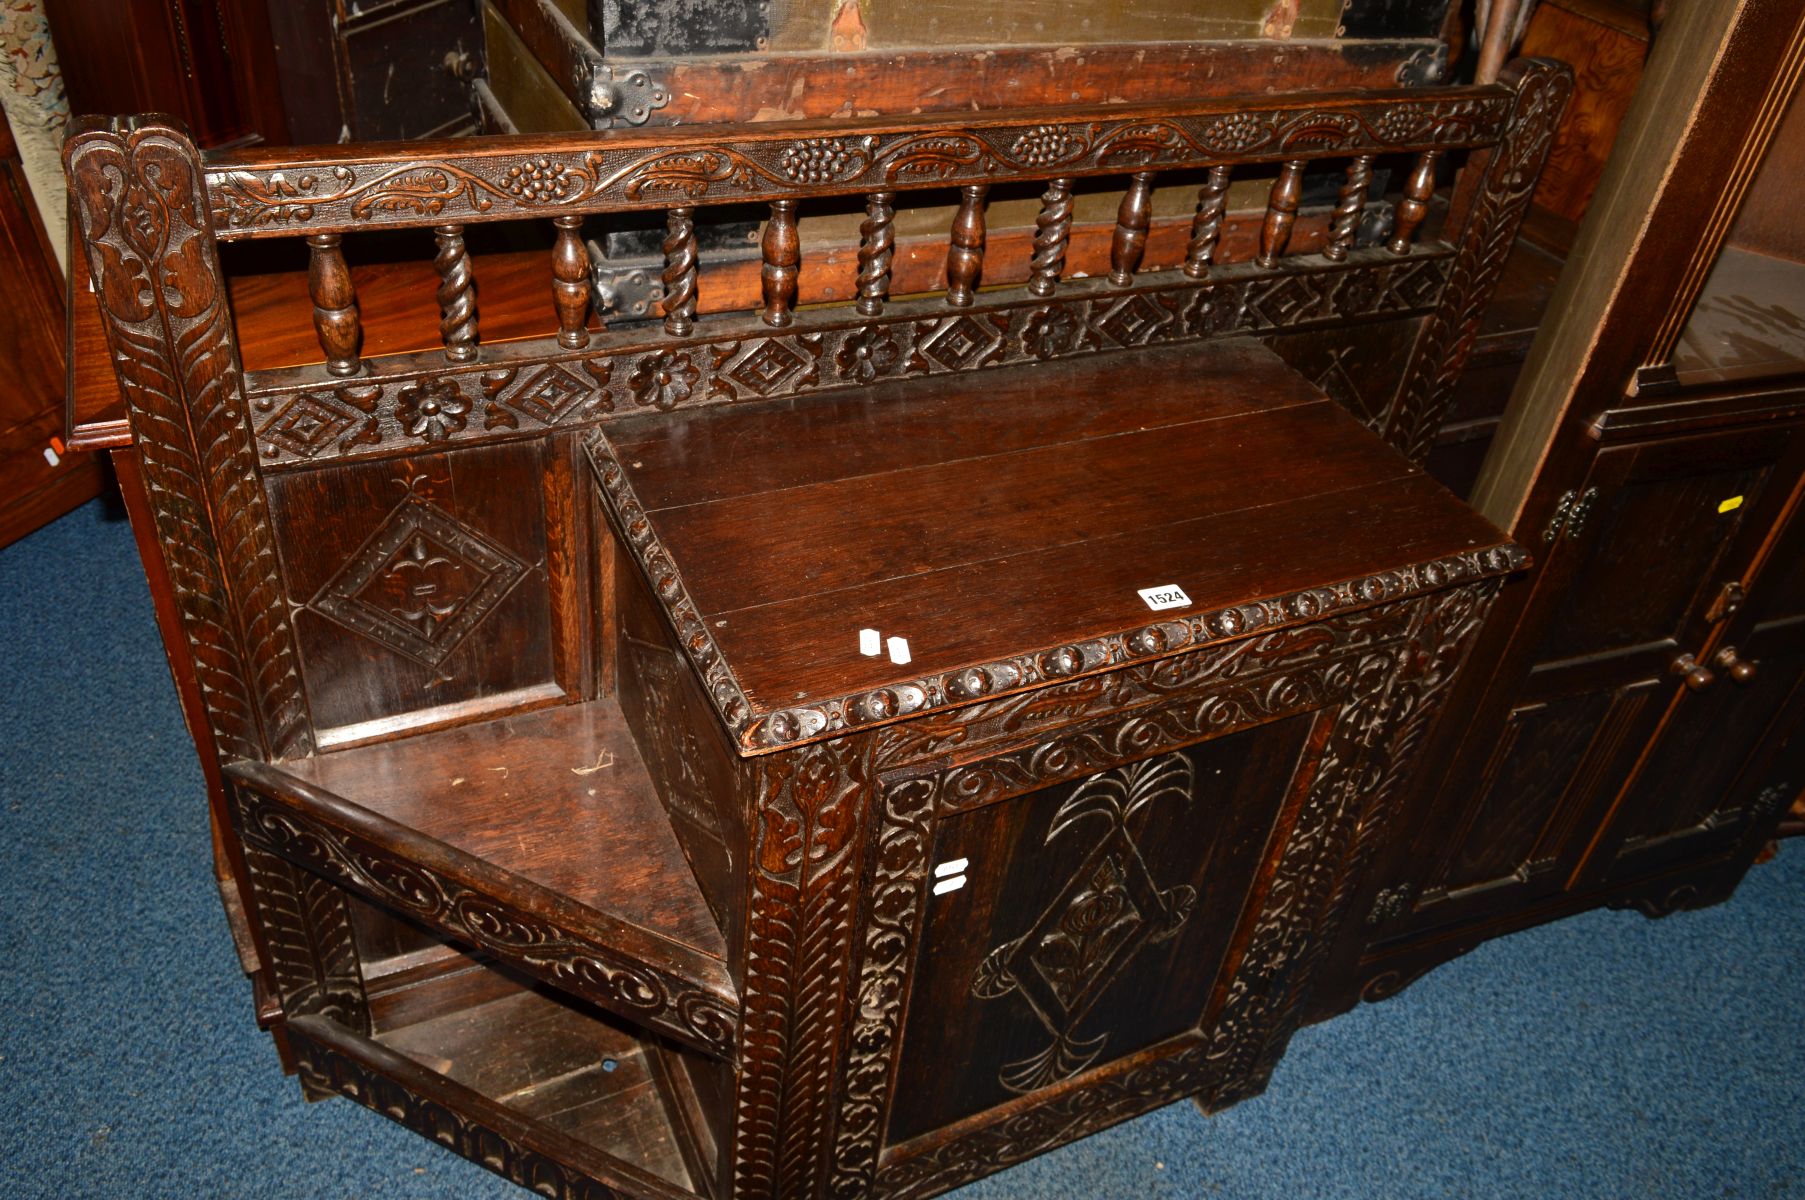 AN EARLY 20TH CENTURY OAK CANTED HALL STAND, carved with grapes, foliage and geometric decoration, - Image 3 of 3